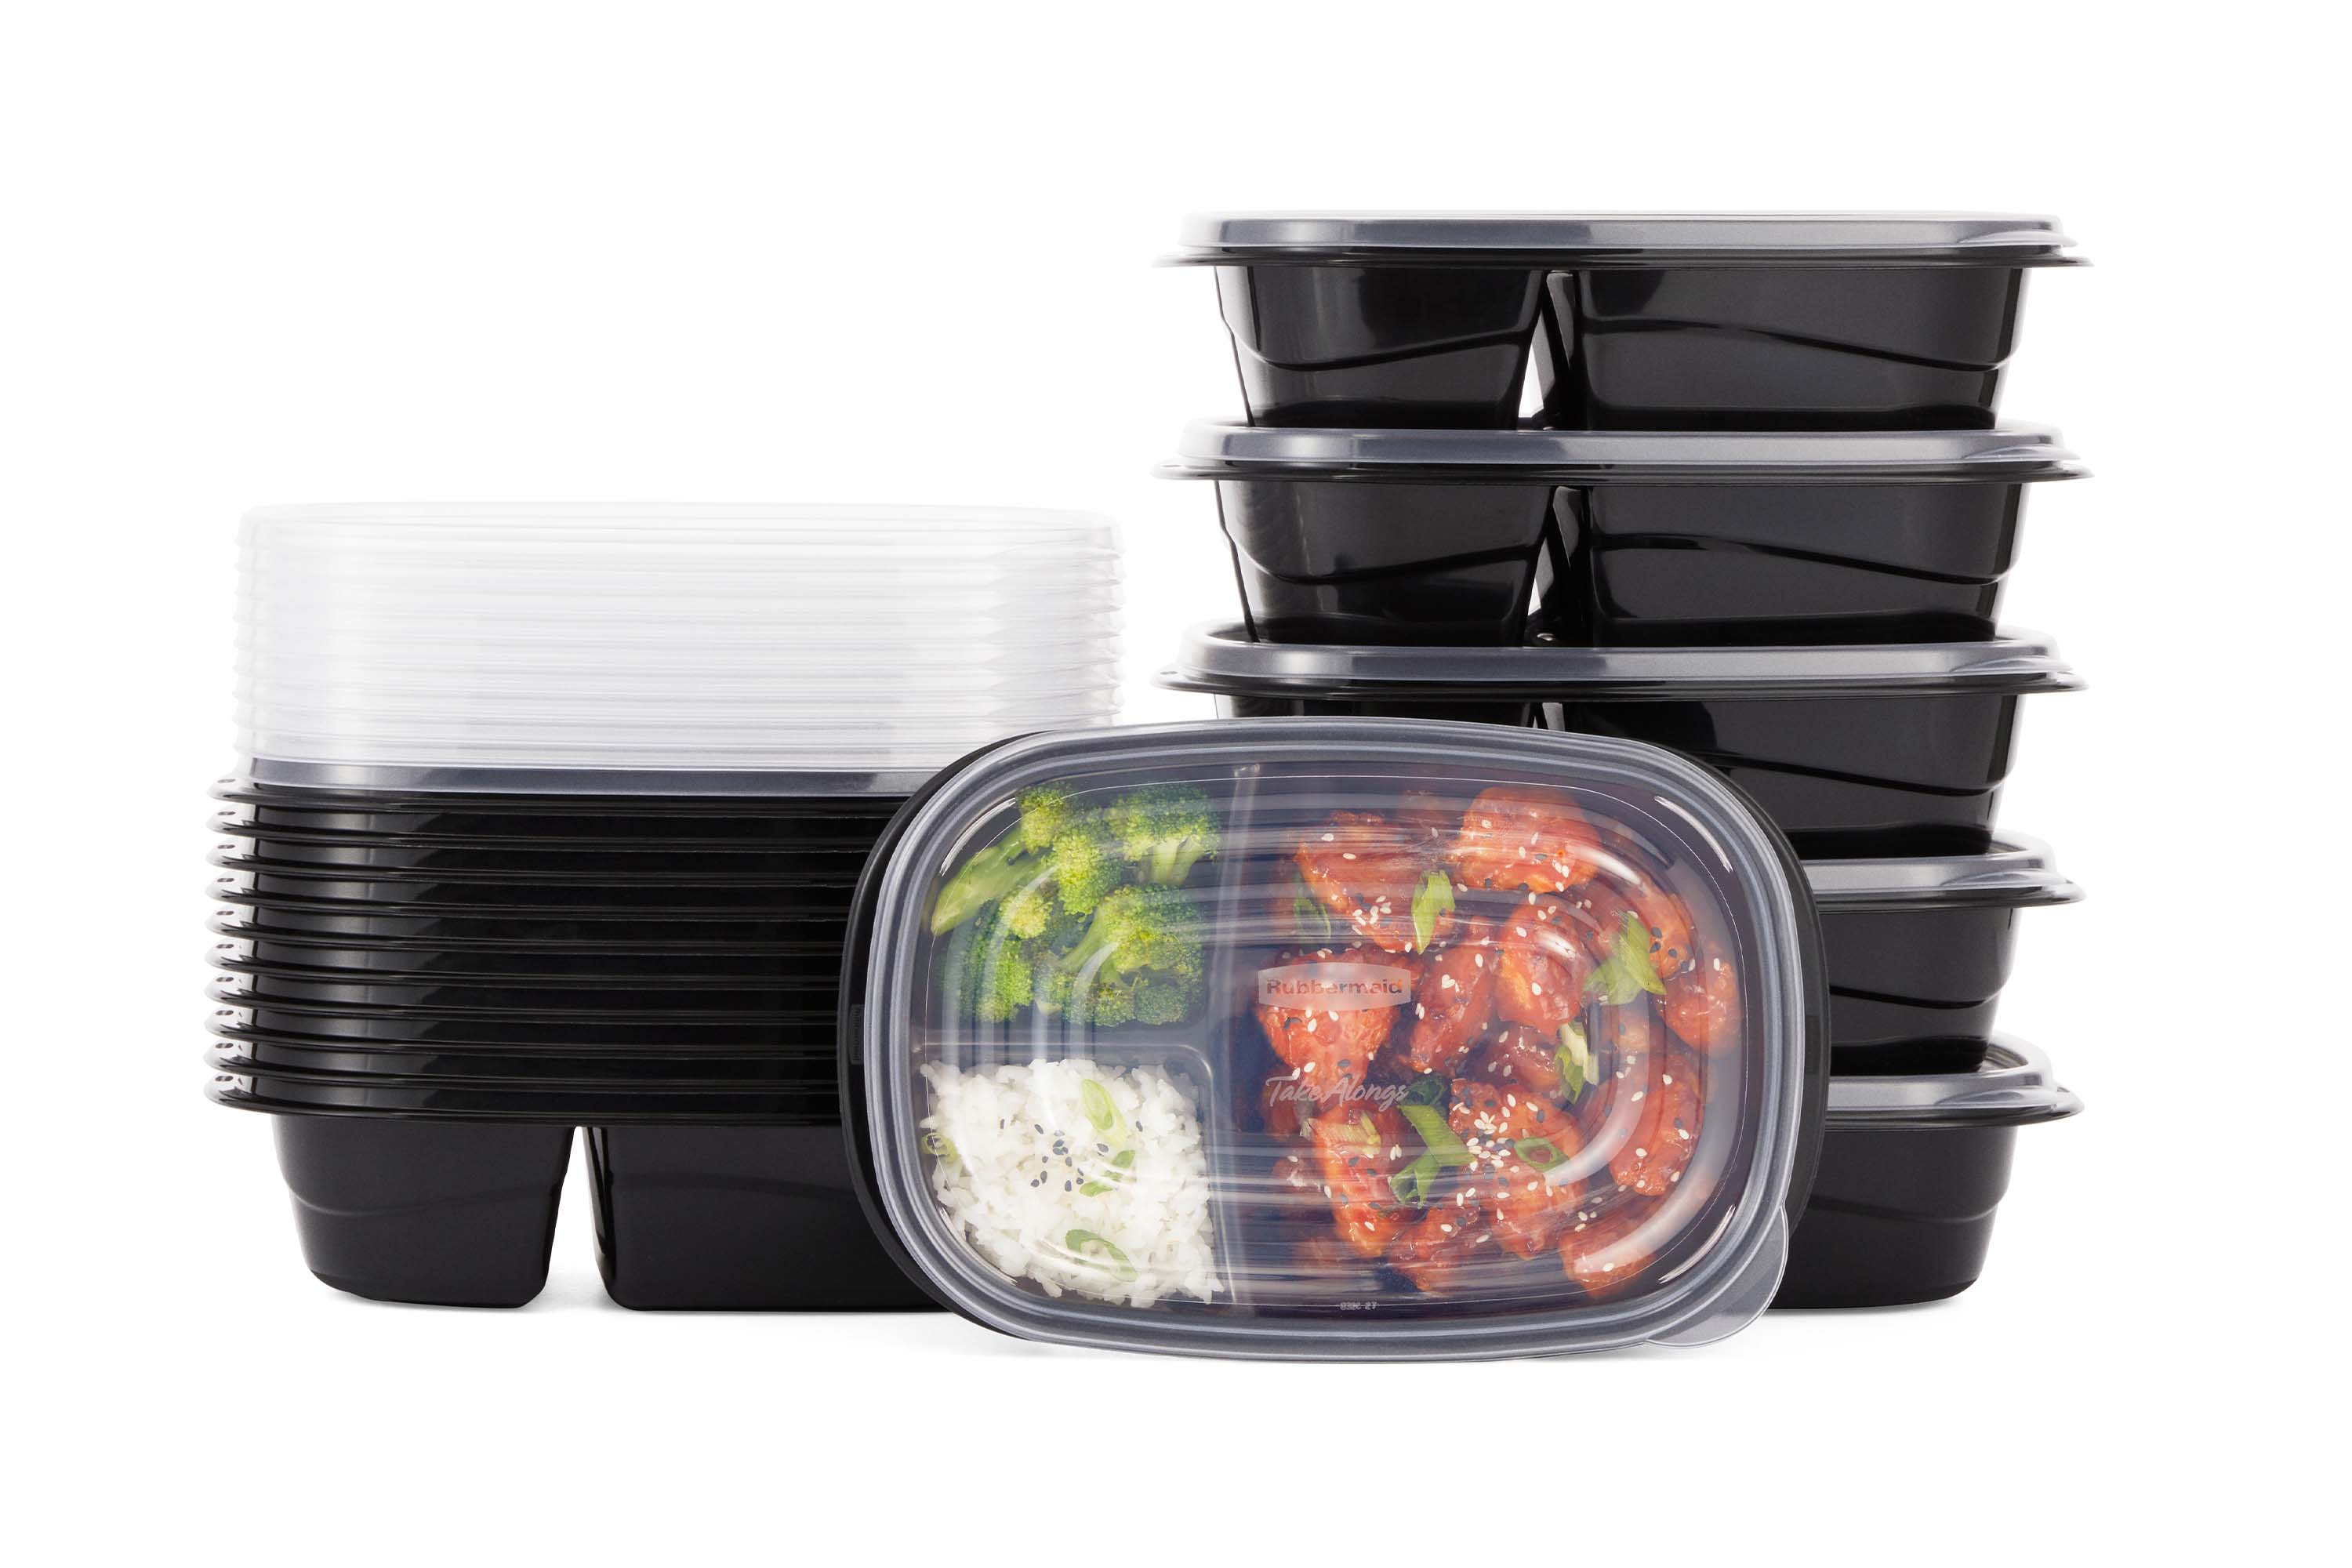 https://www.rubbermaid.com/on/demandware.static/-/Sites-rubbermaid-Library/default/dw1c04c593/TakeAlongs%20Meal%20Prep%20Containers.jpg